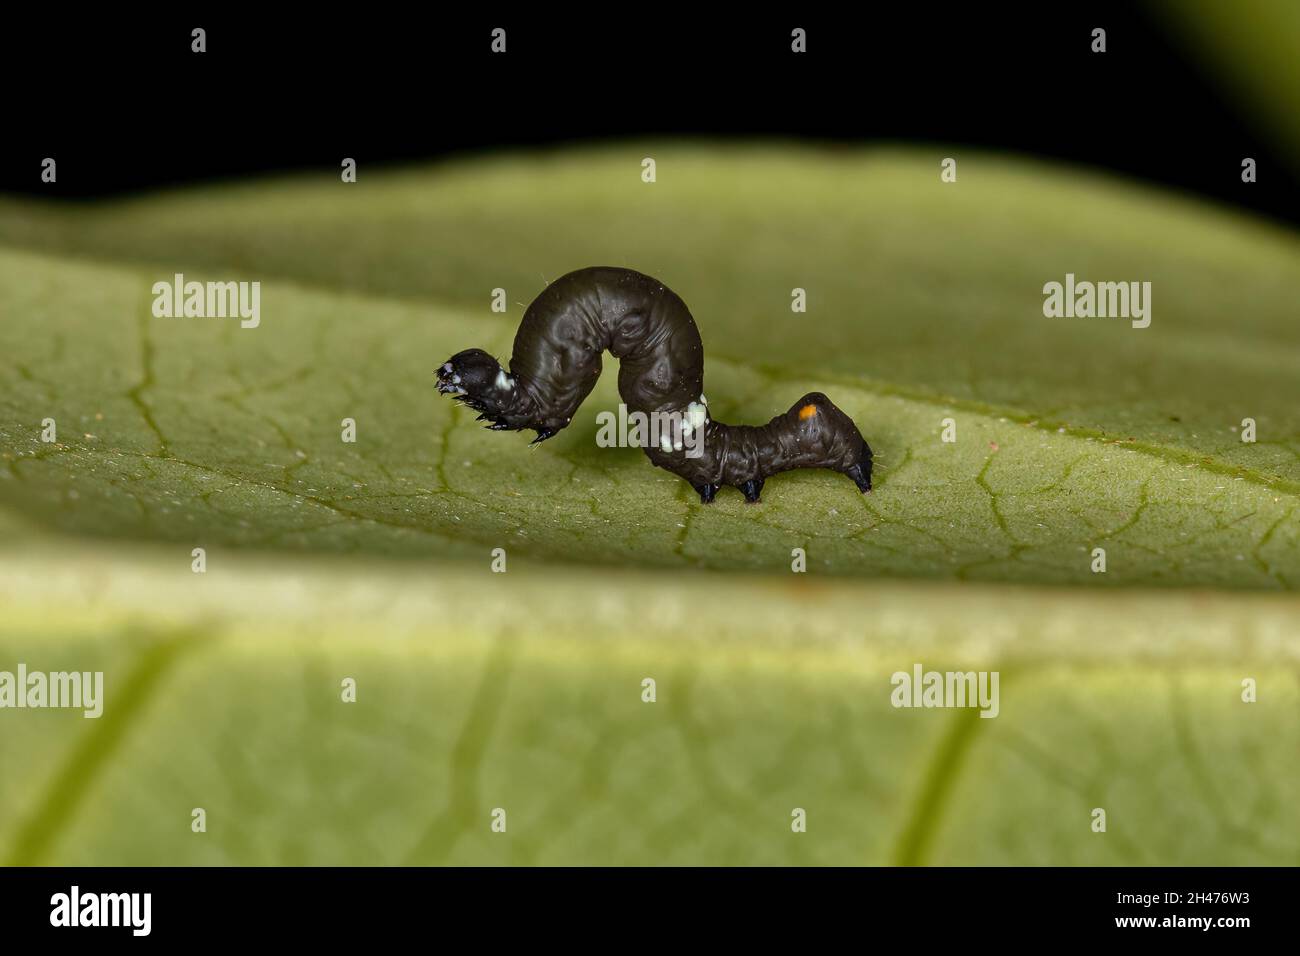 small Butterfly larva of the Order Lepidoptera Stock Photo